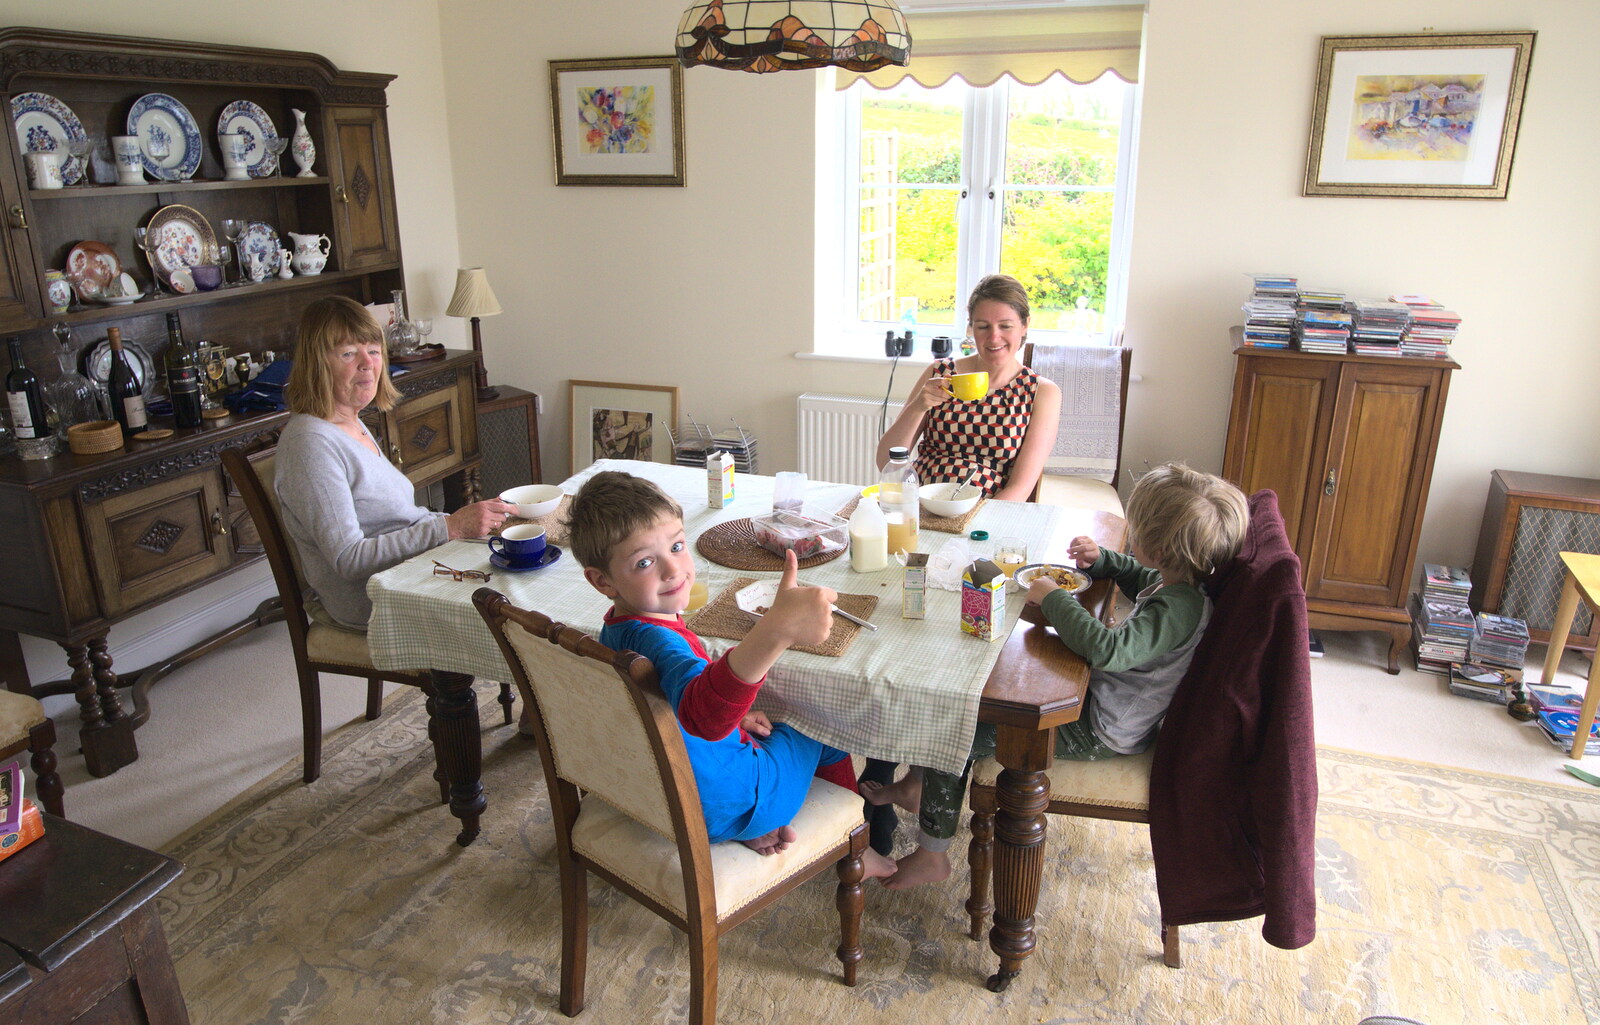 Time for breakfast at Grandma J's from A Barbeque, Grimspound and Pizza, Dartmoor and Exeter, Devon - 15th April 2017